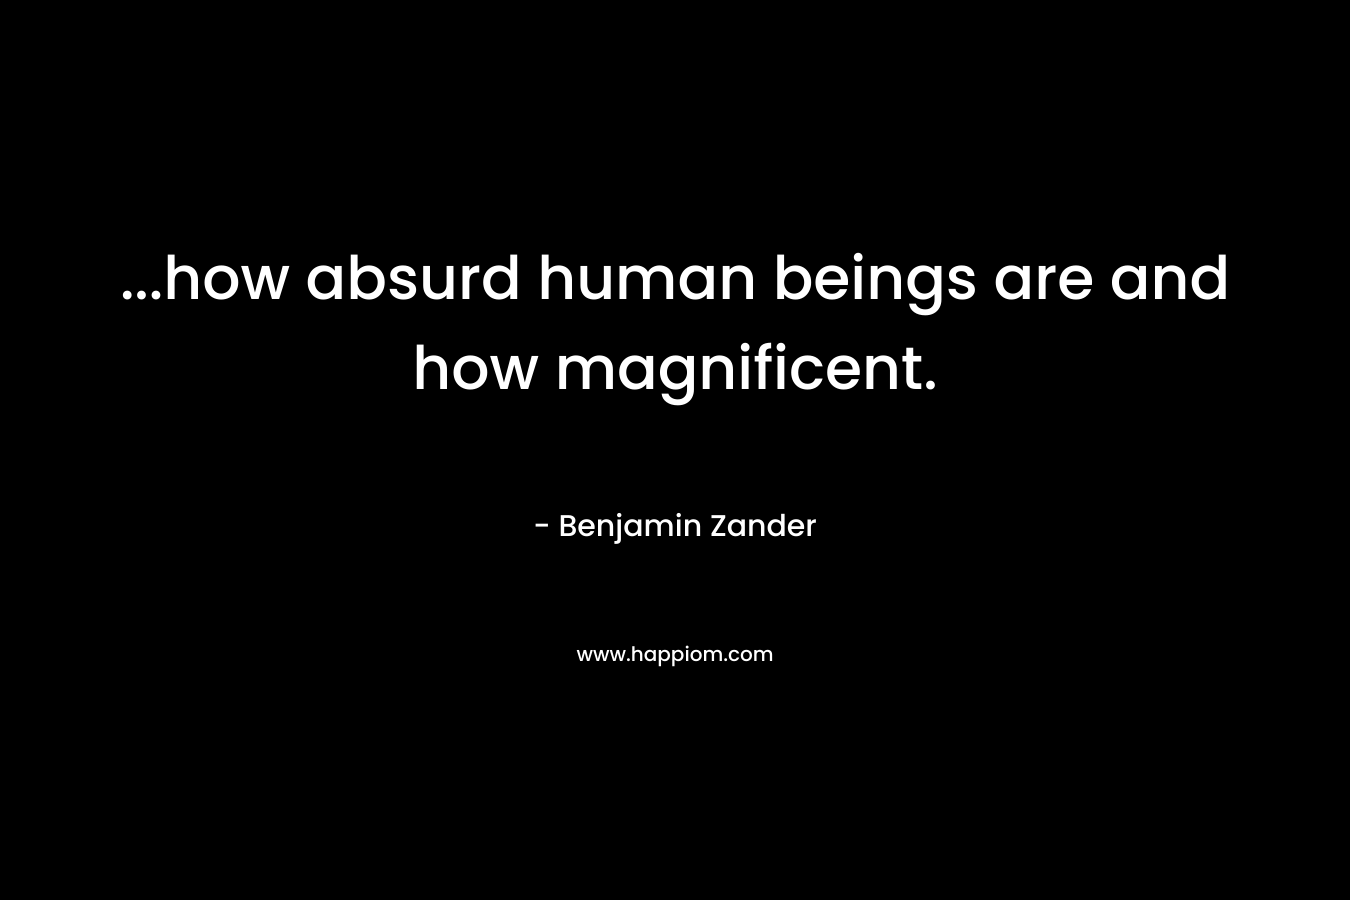 ...how absurd human beings are and how magnificent.